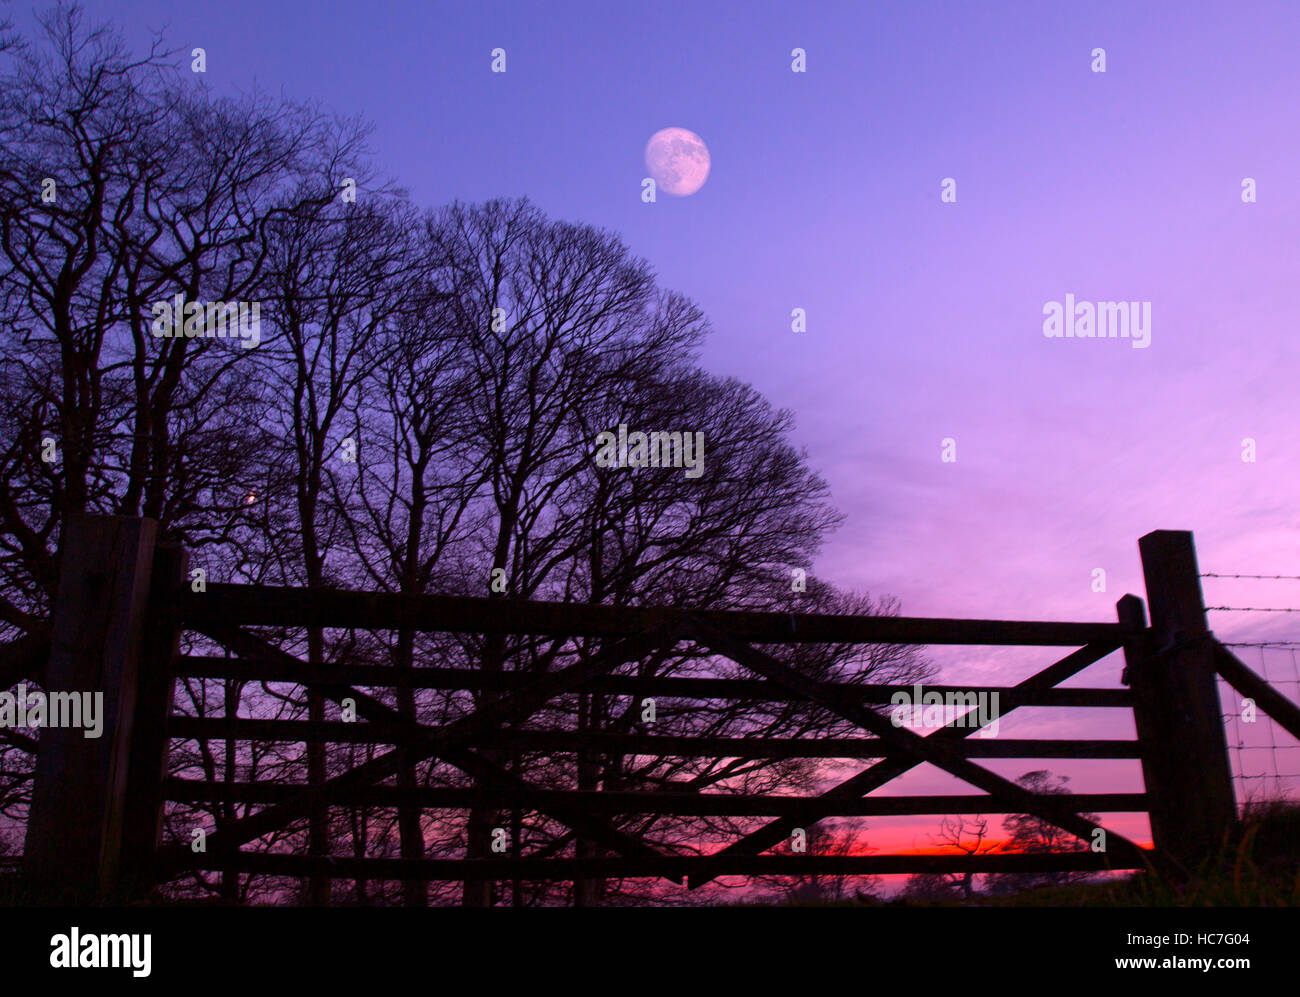 Five bar gate and Bare winter Beeches with rising moon Felbrigg Woods Norfolk Stock Photo